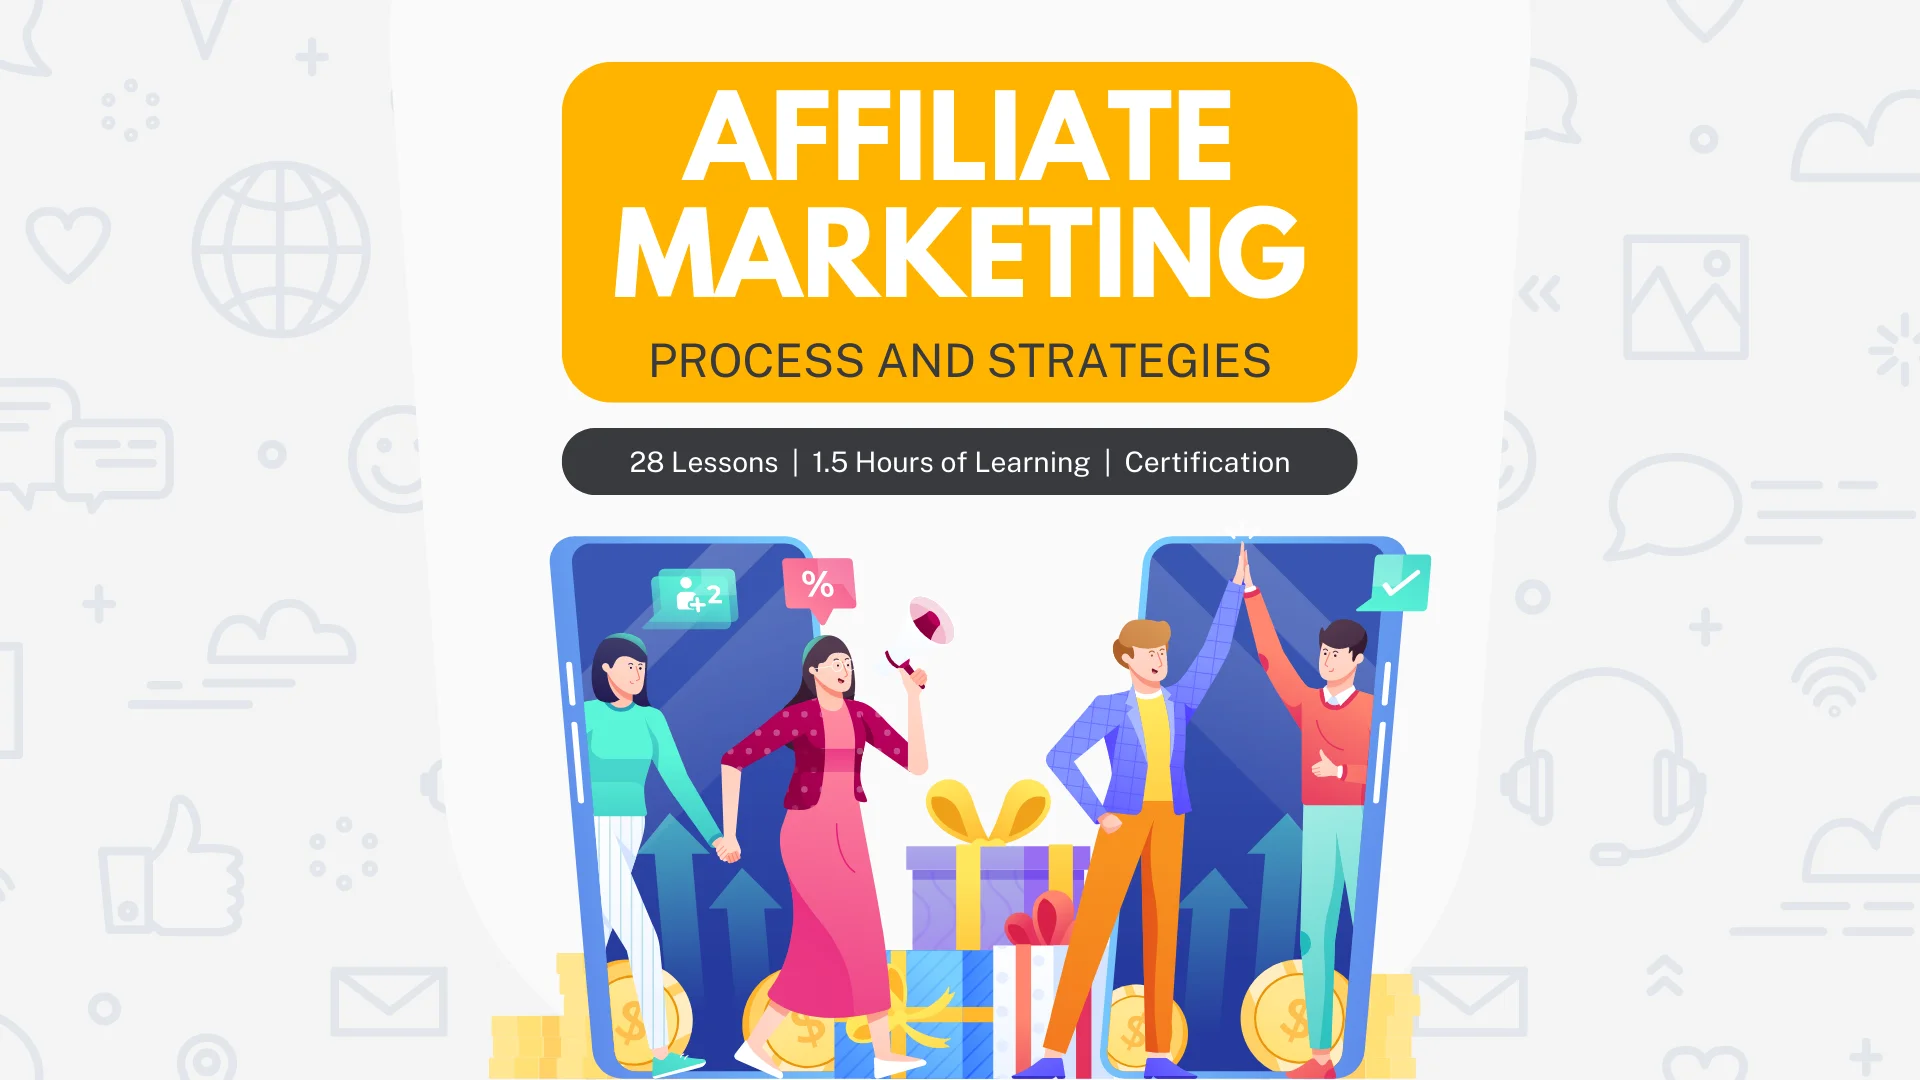 Affiliate Marketing Process and Strategies Course Image